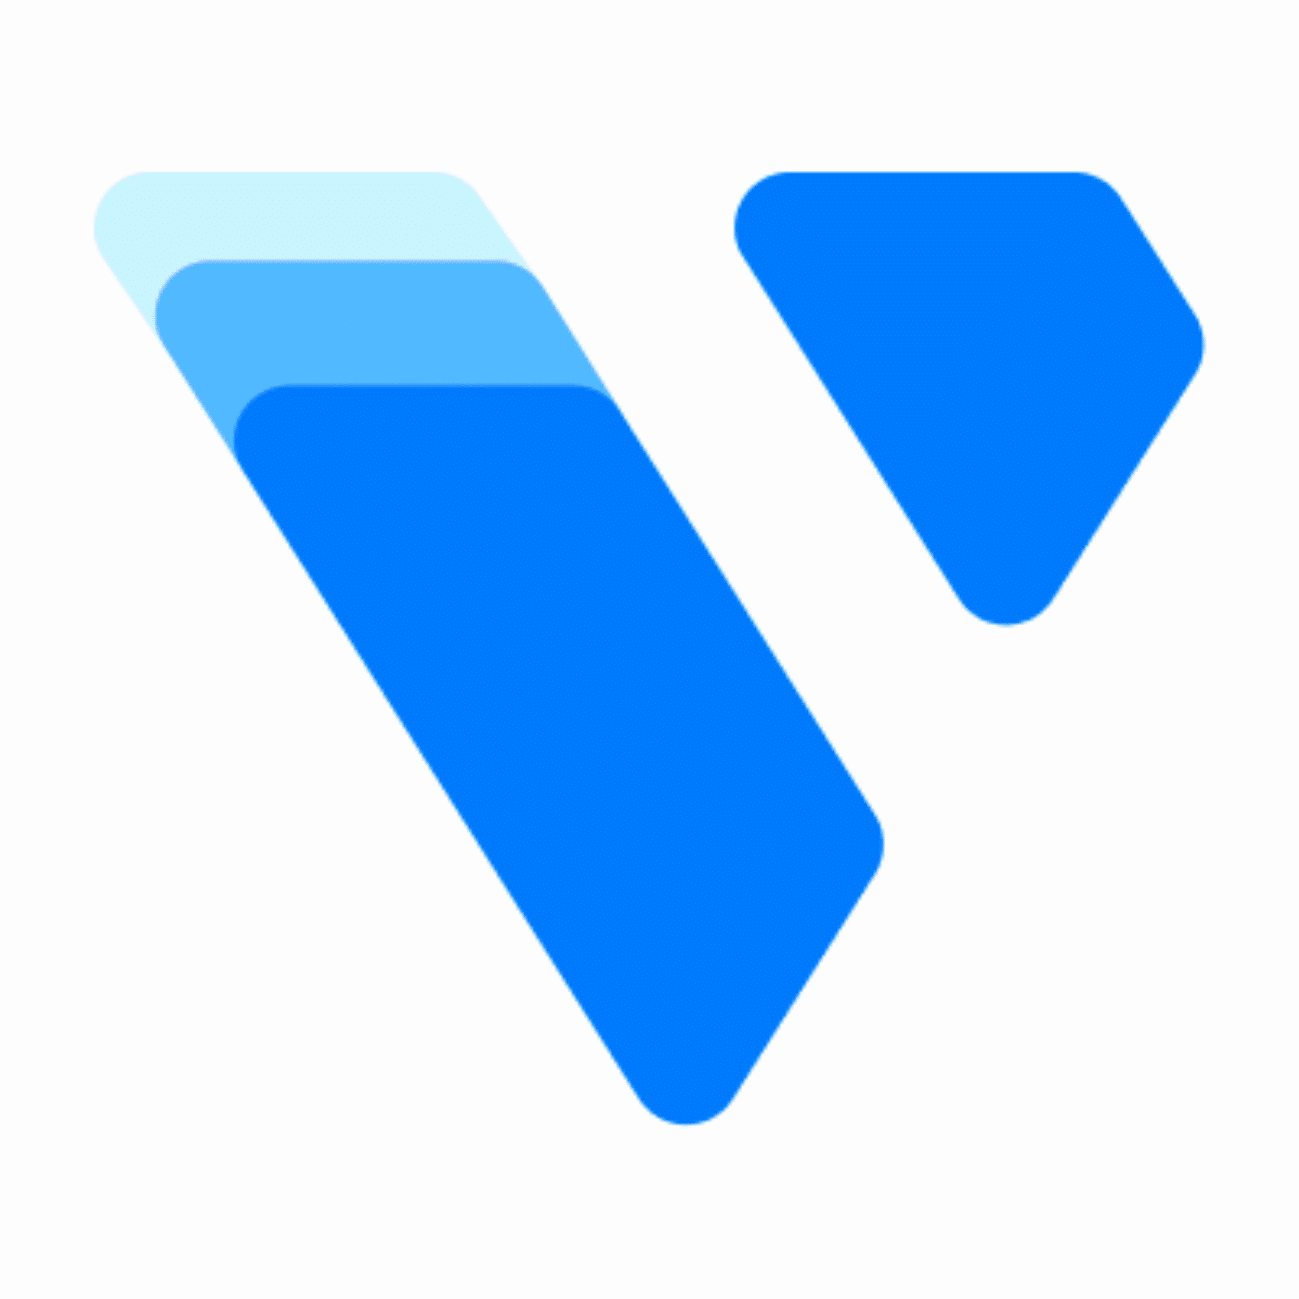 Vultr, established in 2014, is a leading provider of cloud infrastructure known for its high performance and developer-friendly solutions. With a global network of strategically located data centers in major cities, Vultr ensures low-latency connections and high availability for deploying cloud instances, storage, and networking resources efficiently. The platform is characterized by its simplicity and transparency, offering straightforward pricing without hidden fees and featuring an intuitive control panel for easy management of cloud resources, even for beginners. Vultr serves a diverse user base ranging from individual developers and startups to large enterprises, providing a variety of cloud compute instances, storage options, dedicated servers, and Kubernetes-as-a-Service. Overall, Vultr is distinguished in the cloud computing industry for its reliability, performance, affordability, and user-friendly approach, attracting businesses and developers seeking efficient cloud infrastructure solutions.